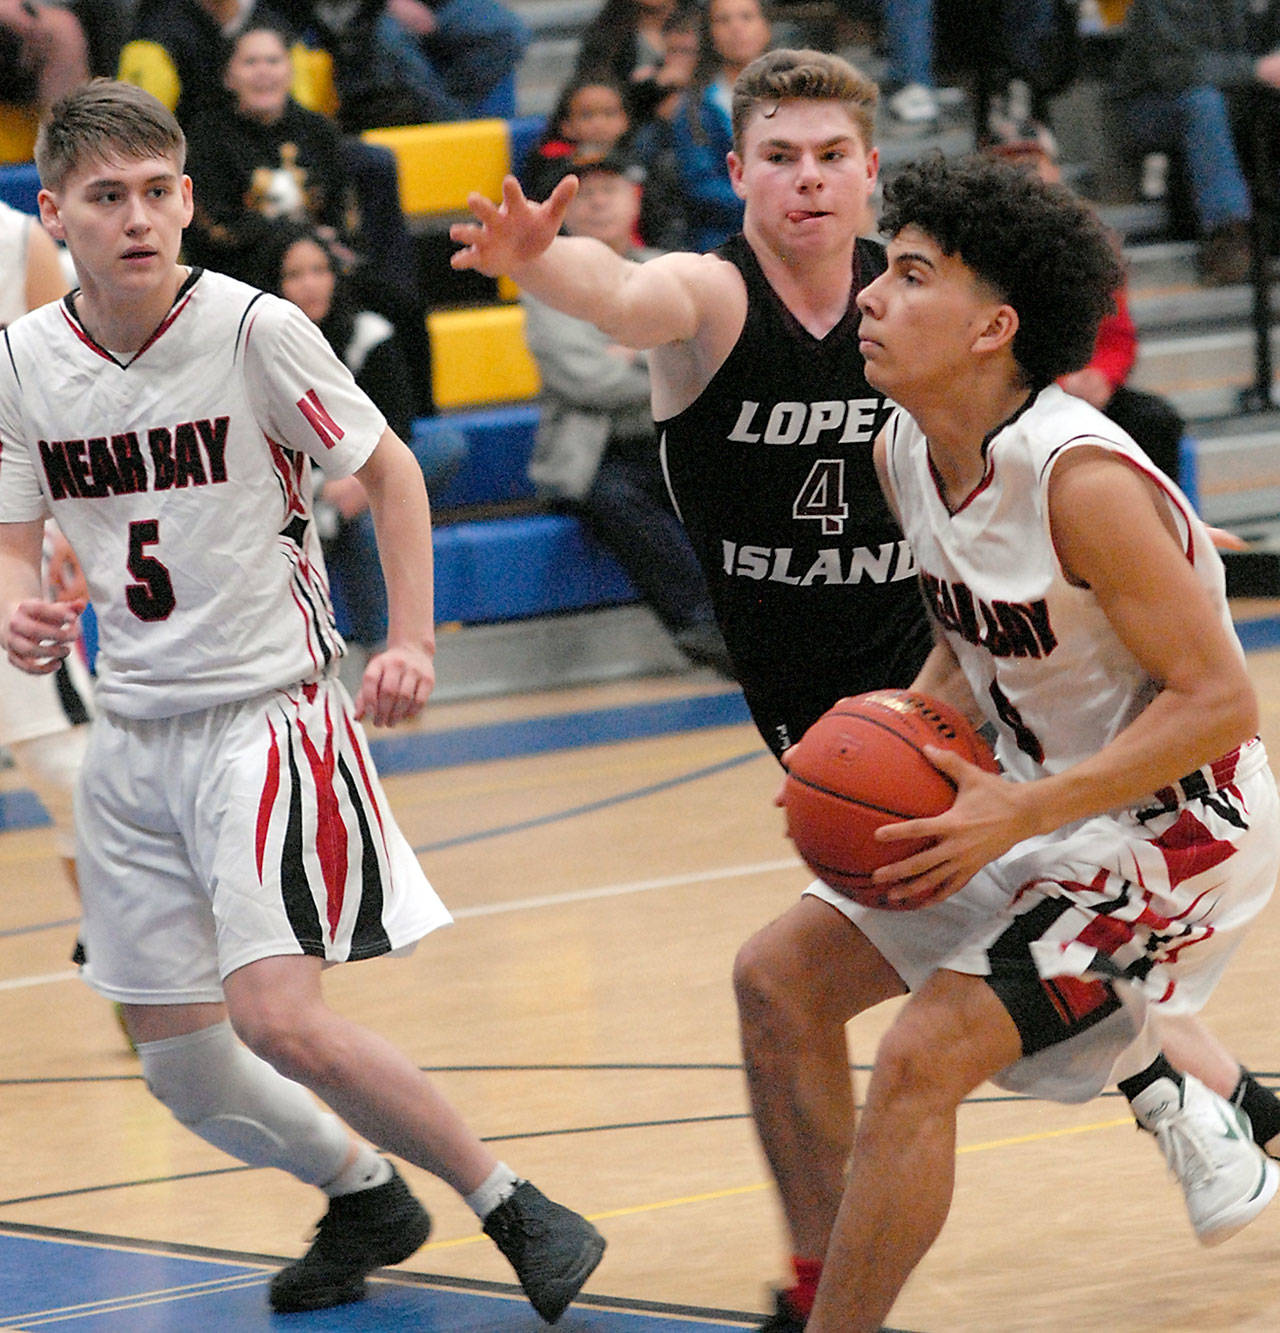 Keith Thorpe/Peninsula Daily News Neah Bay’s Jaxson Halttunen, right, heads for the lane defended by Lopez Island’s Avery Conner as Halttunen’s teammate, Darrin Horejsi looks on during Saturday’s game in Joyce.